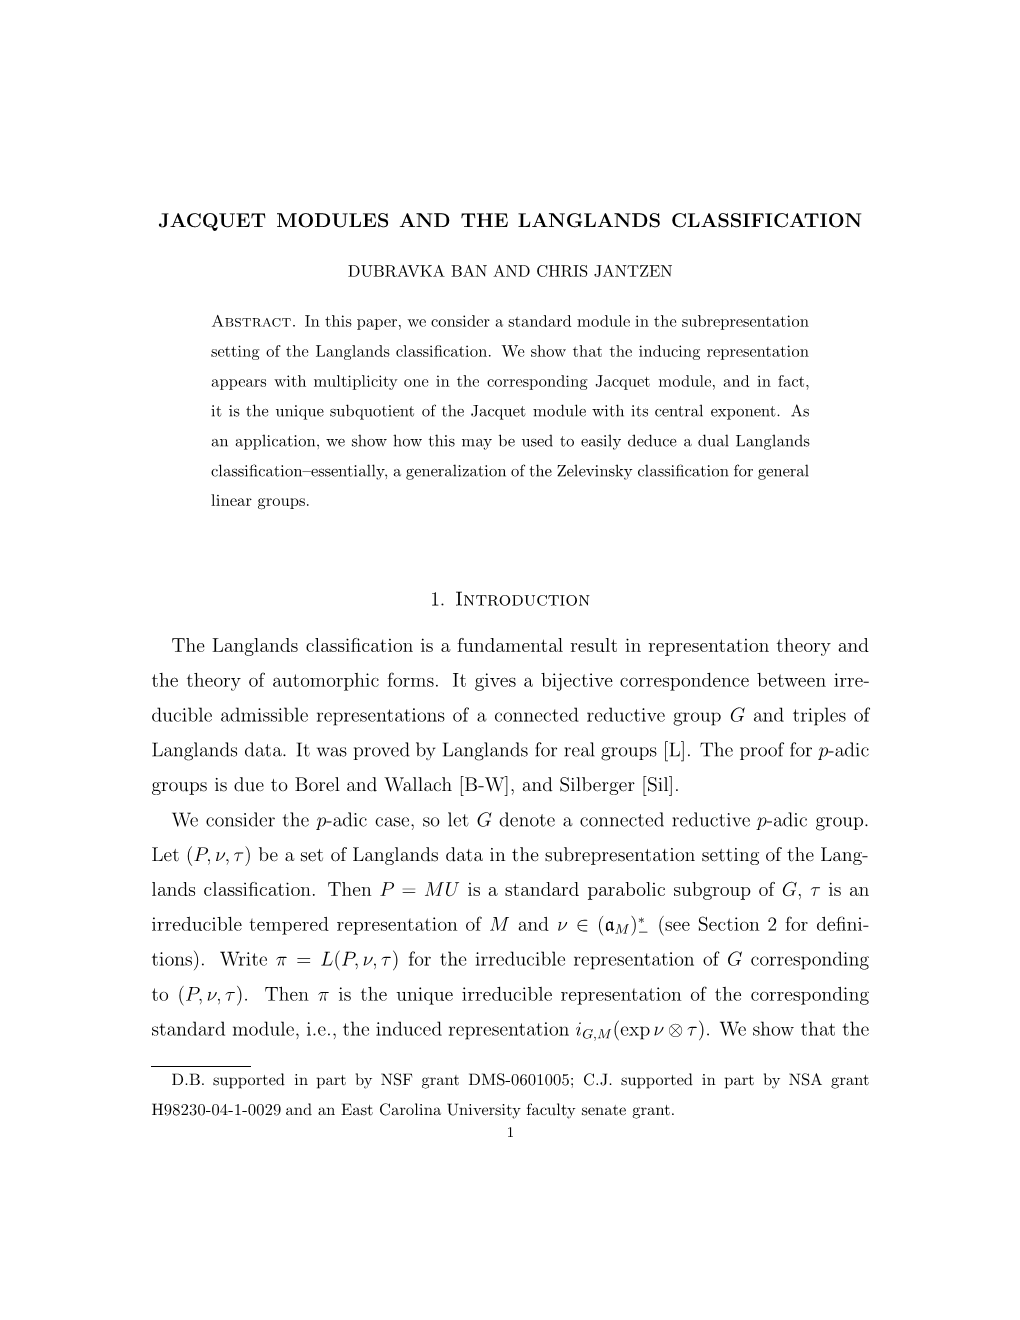 Jacquet Modules and the Langlands Classification